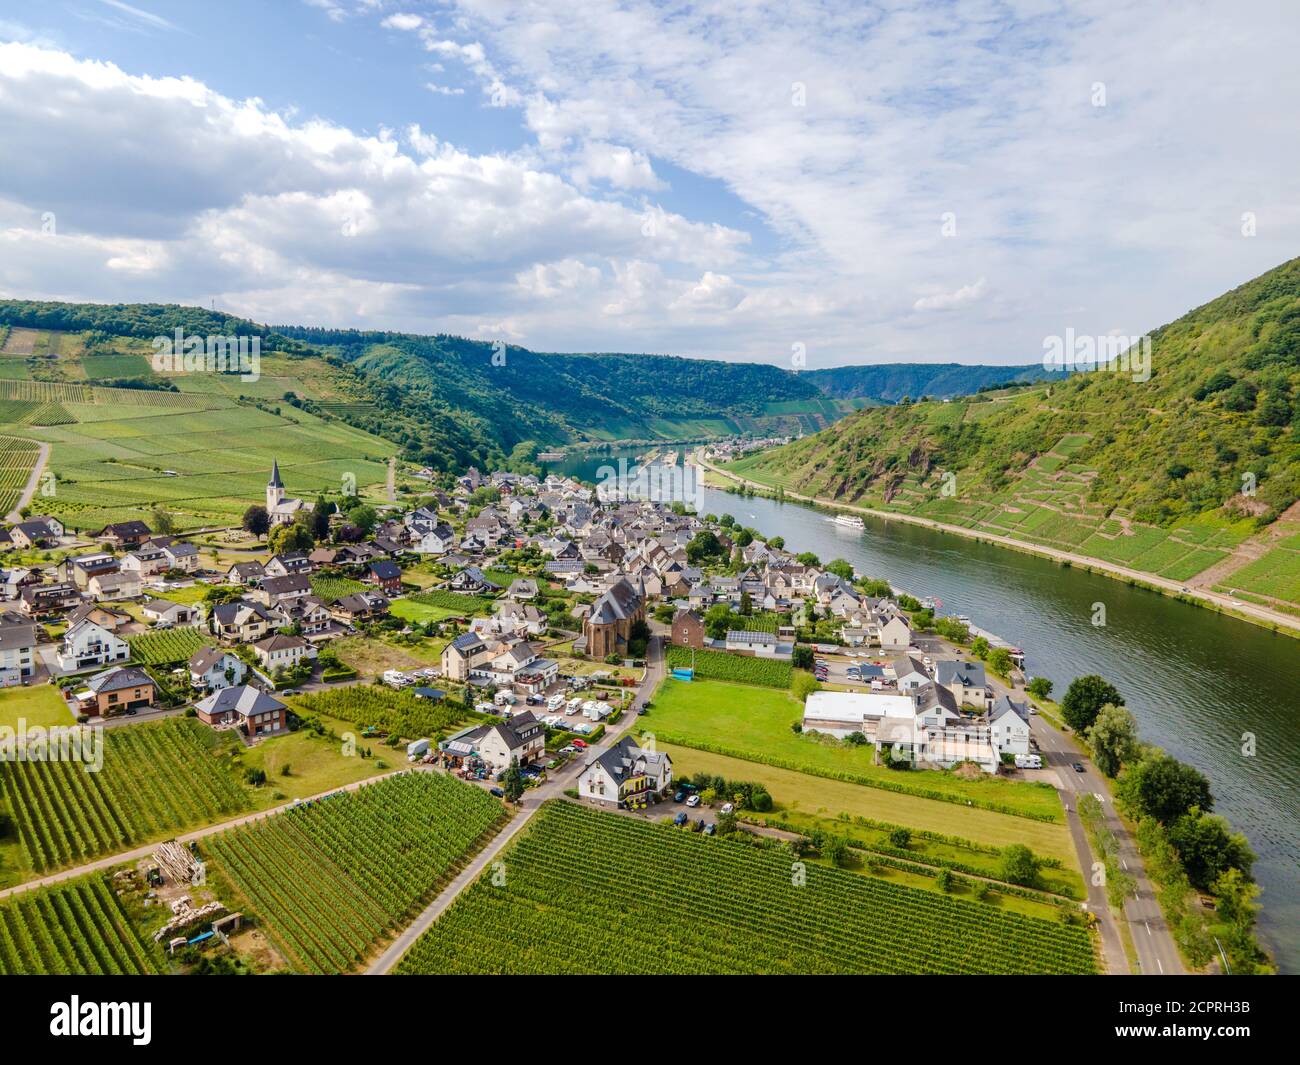 Ellenz-Poltersdorf aerial view, nearby Burg Metternich in the town Beilstein on romantic Moselle, Mosel river. Rhineland-Palatinate, Germany Stock Photo